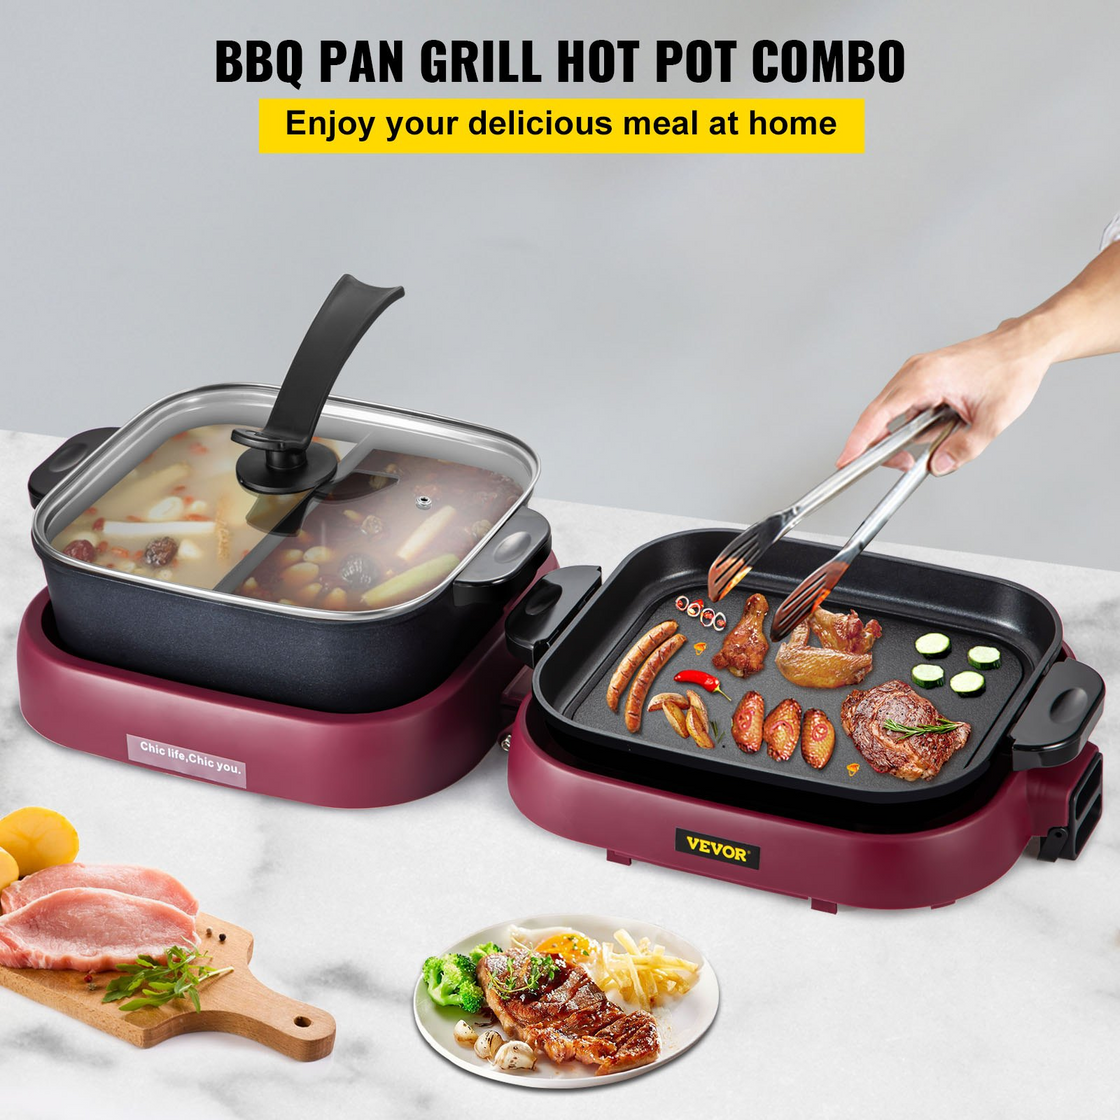 VEVOR 2 in 1 Electric BBQ Pan Grill Hot Pot - Foldable Design, Dual Temperature Control, High-Efficient Heating - 2100W